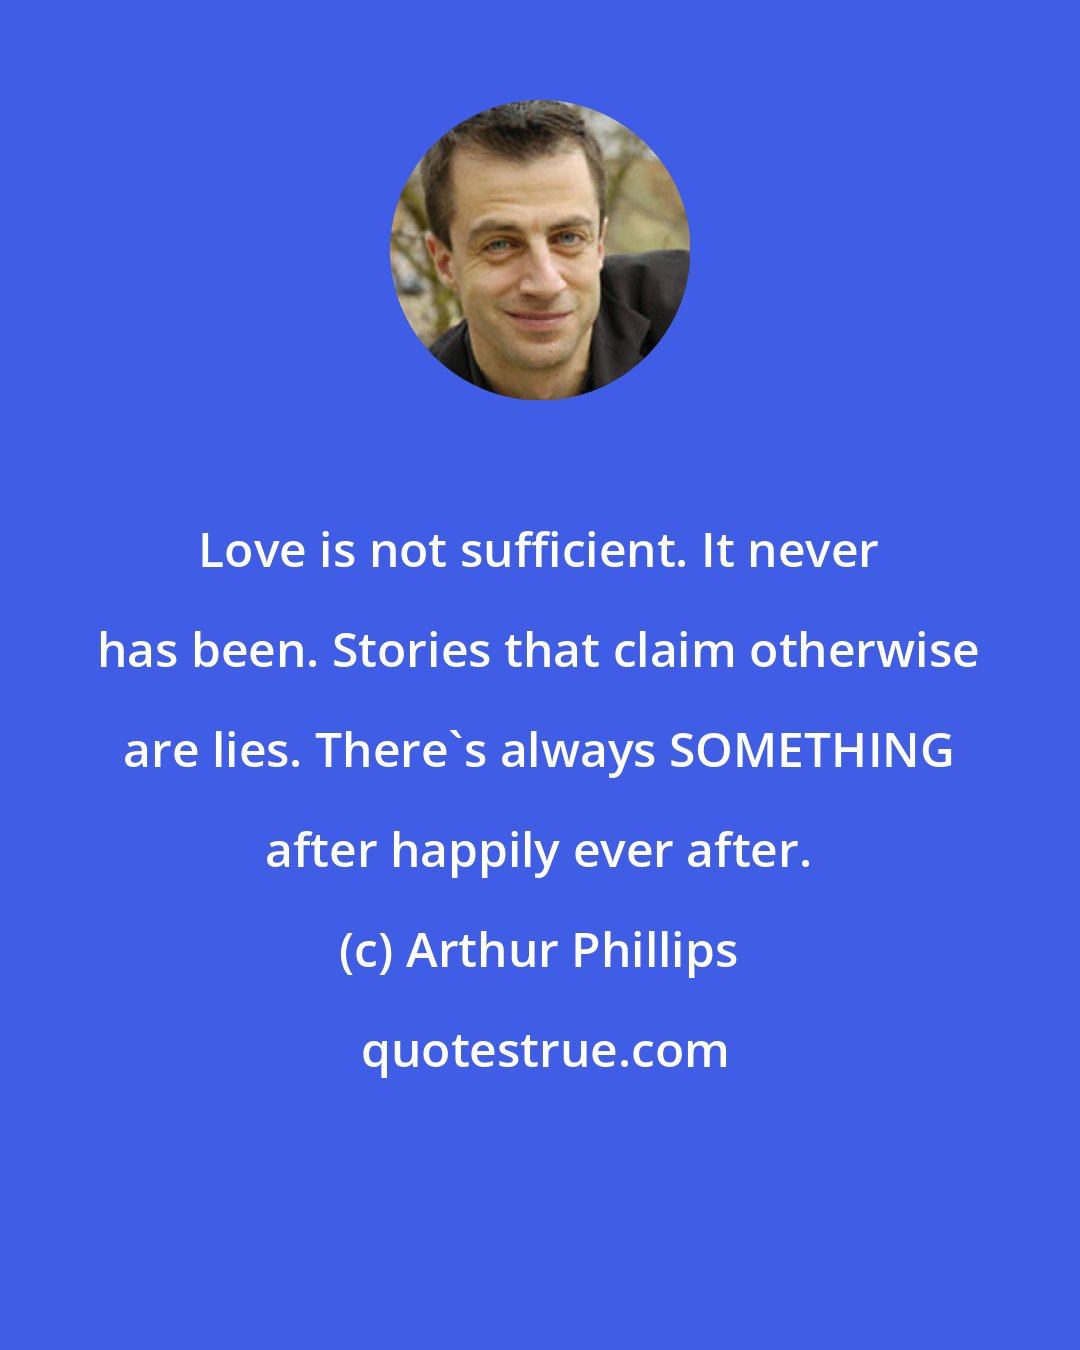 Arthur Phillips: Love is not sufficient. It never has been. Stories that claim otherwise are lies. There's always SOMETHING after happily ever after.